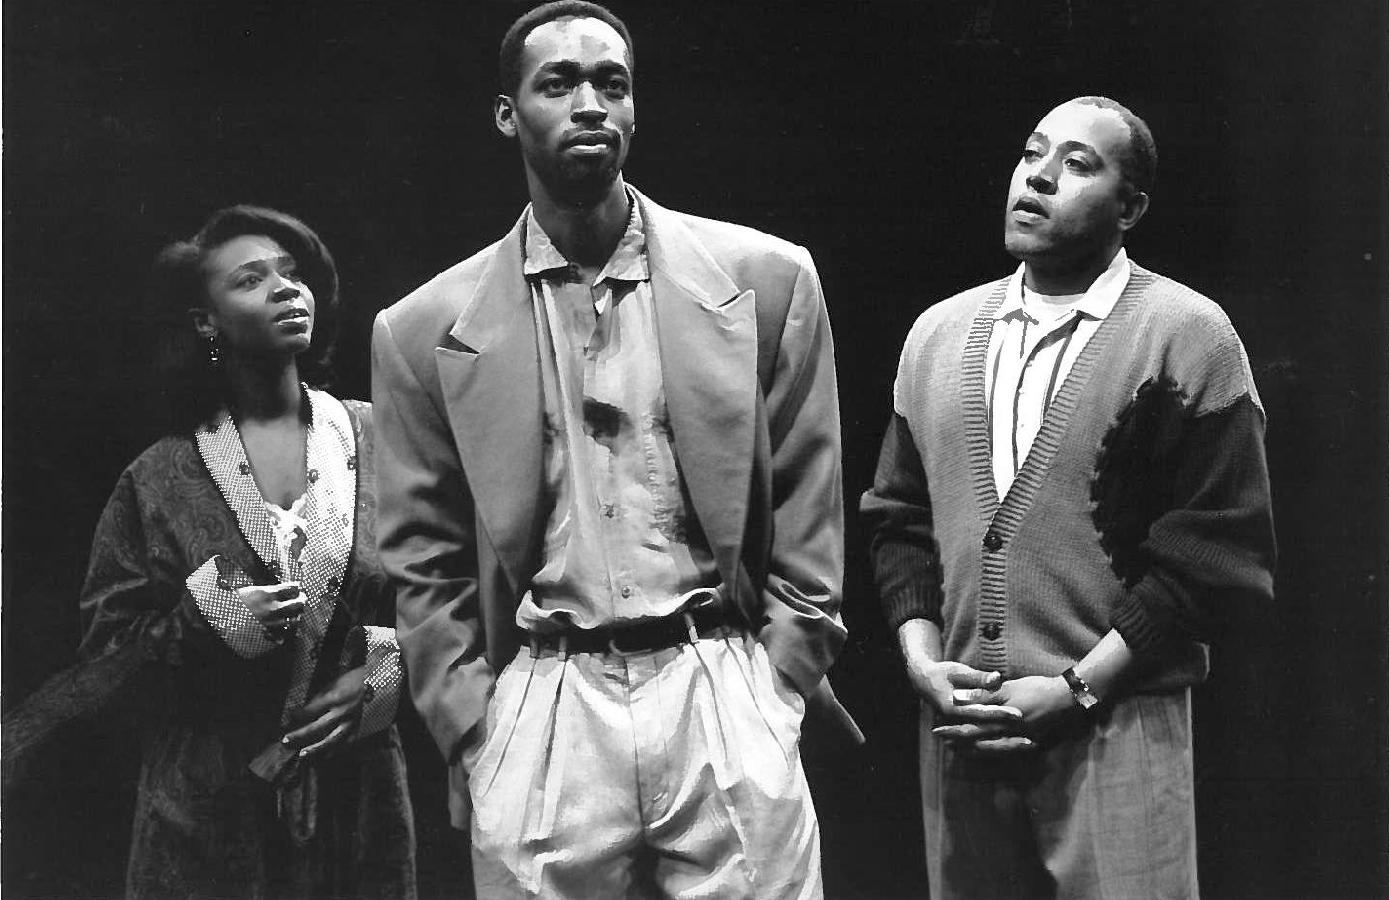 Cynthia Martells, Michael Jayce, and Keith Randolph Smith in "Before It Hits Home," directed by Tazewell Thompson at Arena Stage in 1991. (Photo by Joan Marcus)